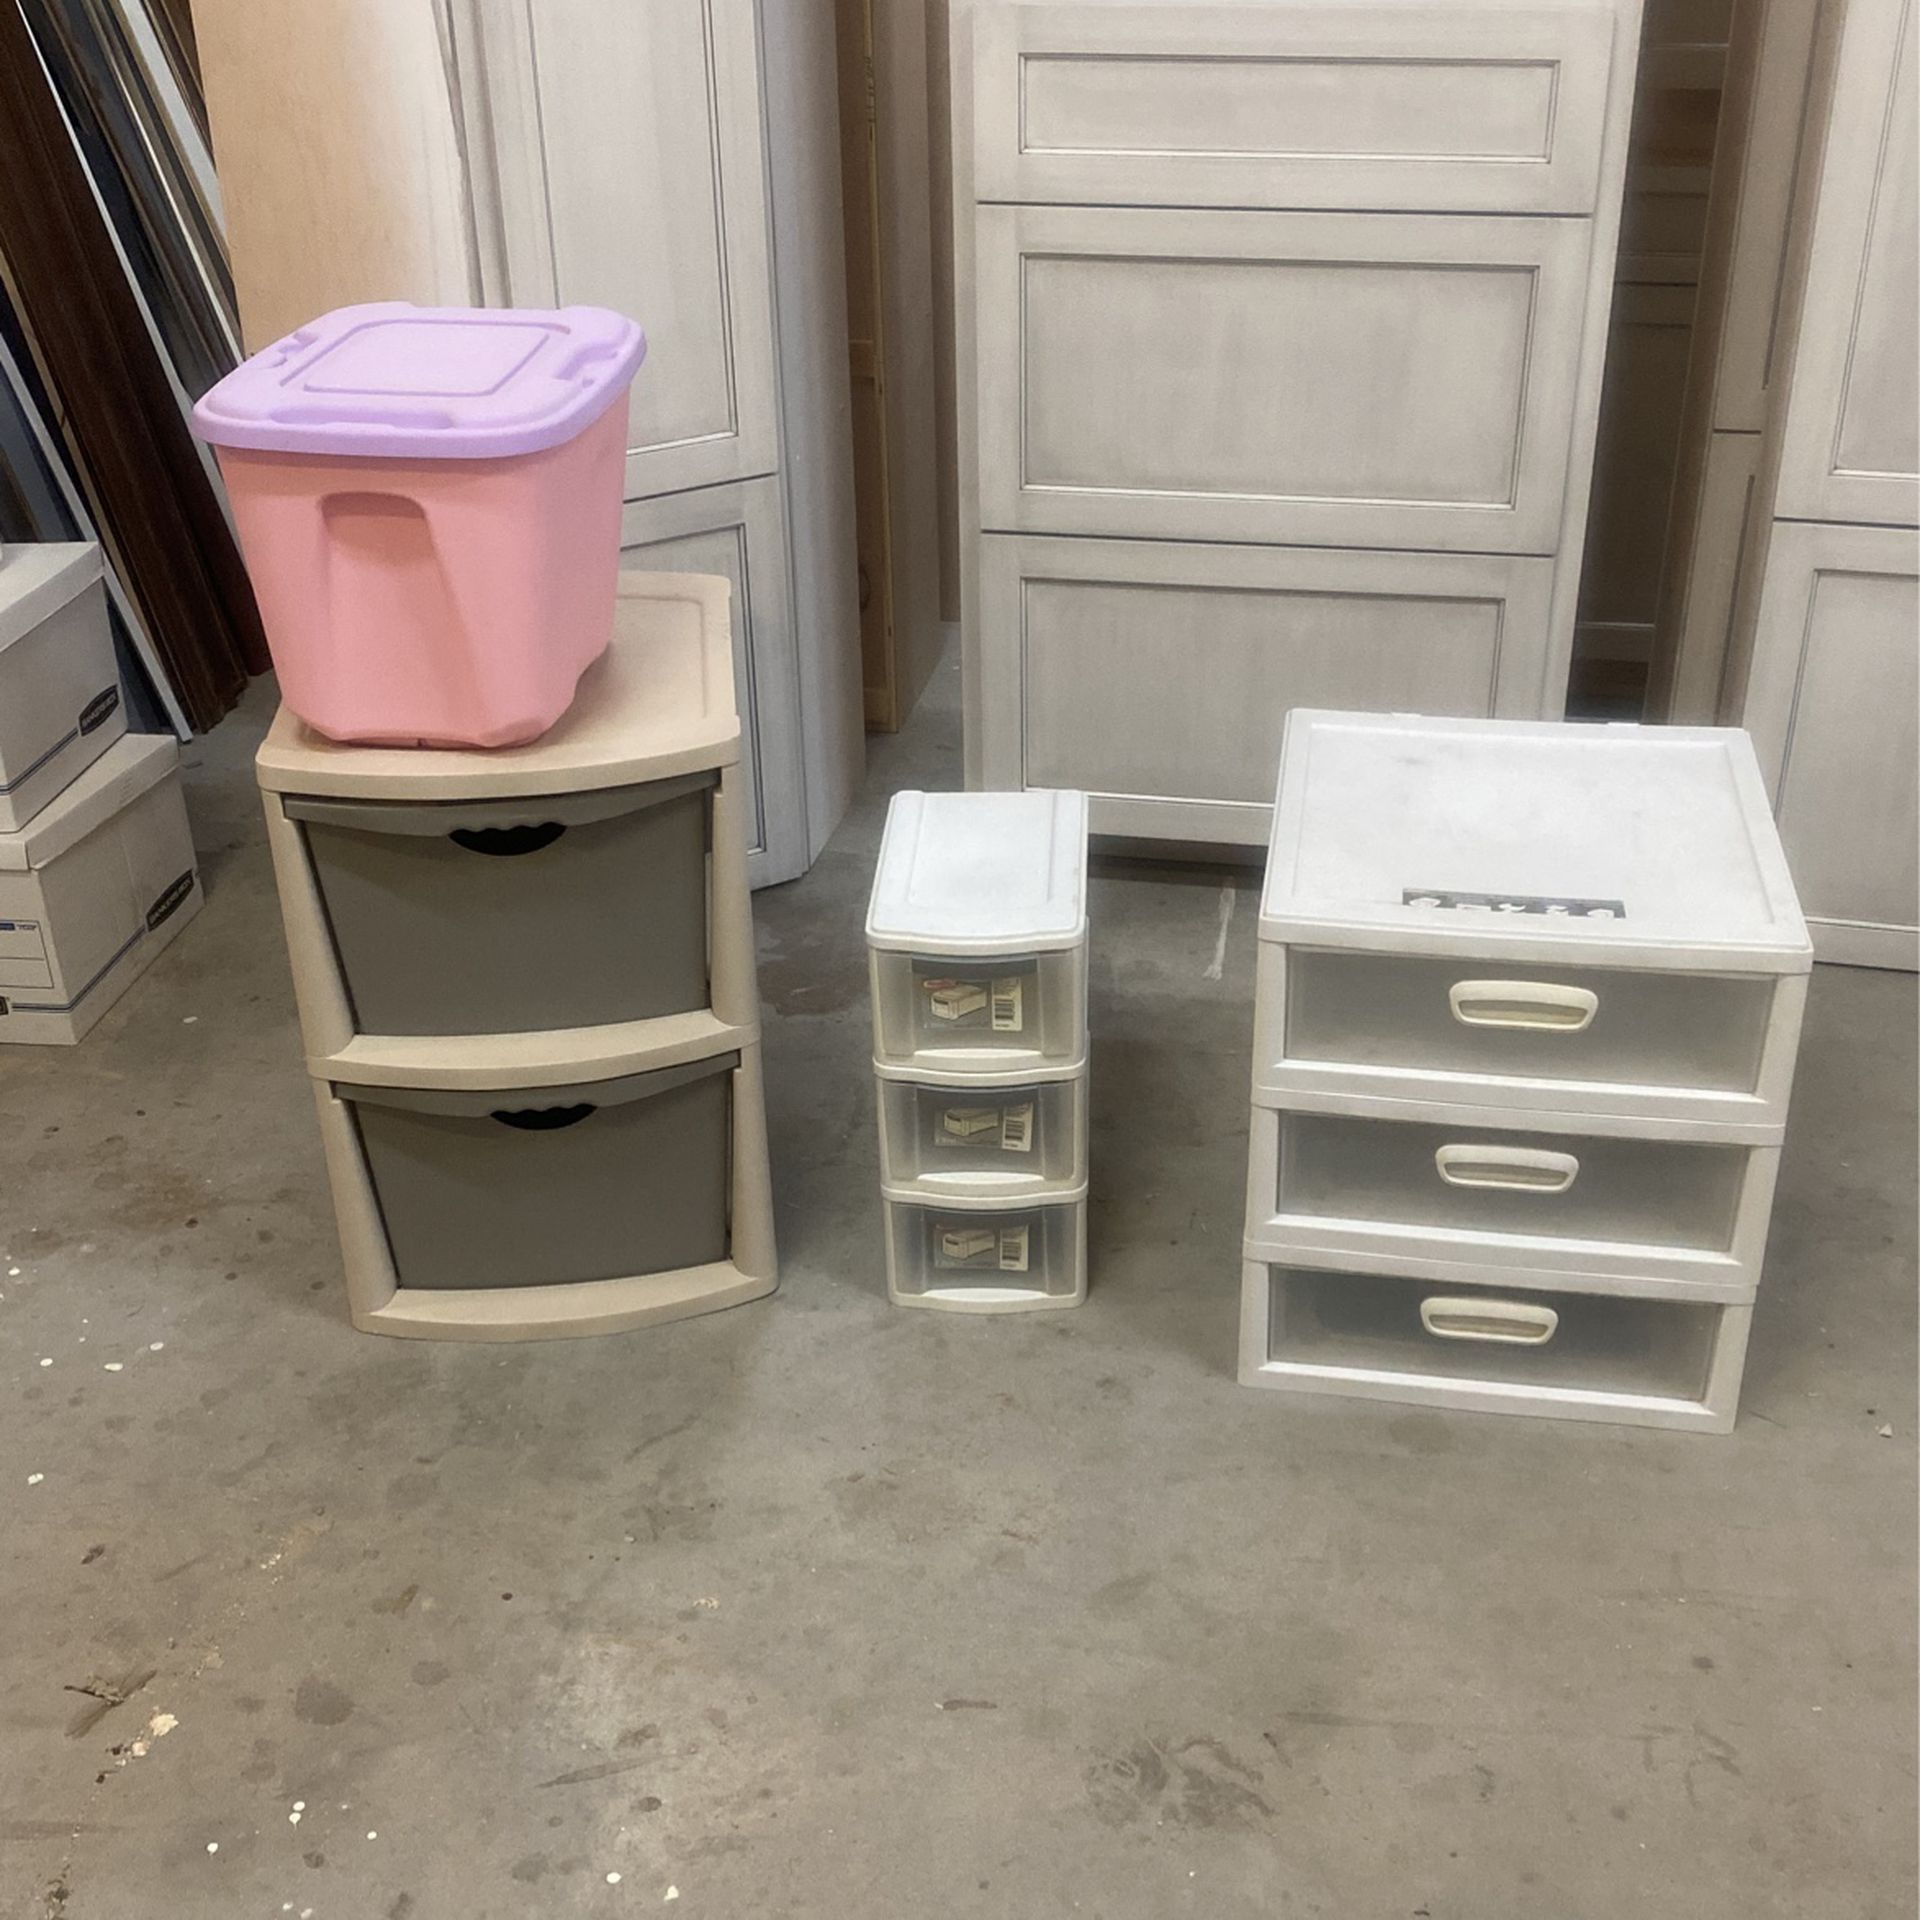 3 Plastic Drawers And 1 Small Plastic Been